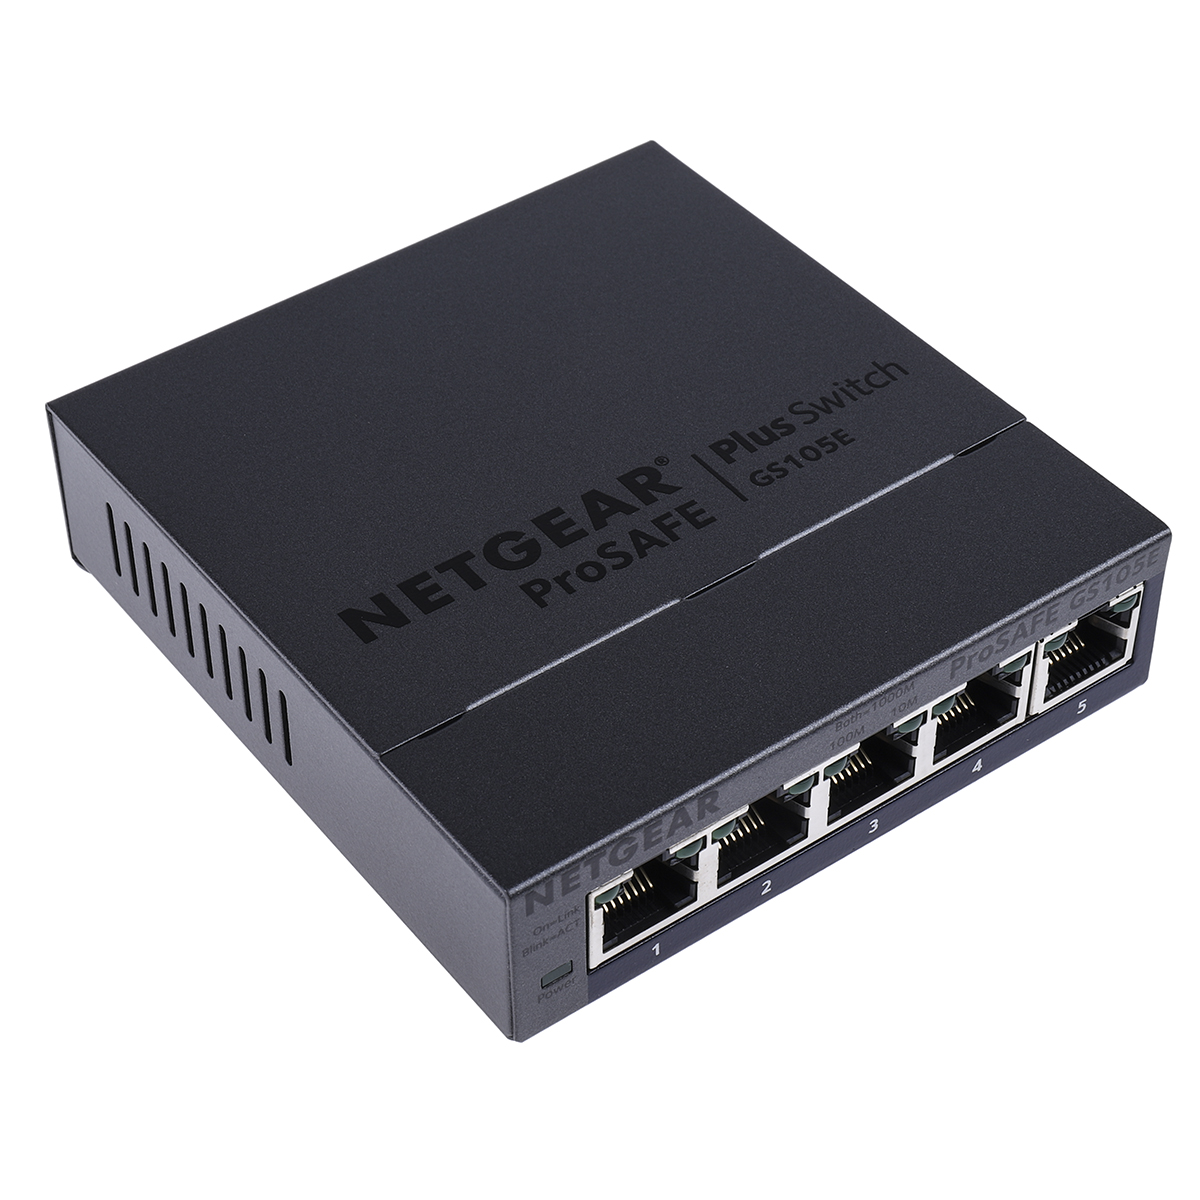 EDIMAX - Legacy Products - Switches - 5 Ports 10/100Mbps Desktop